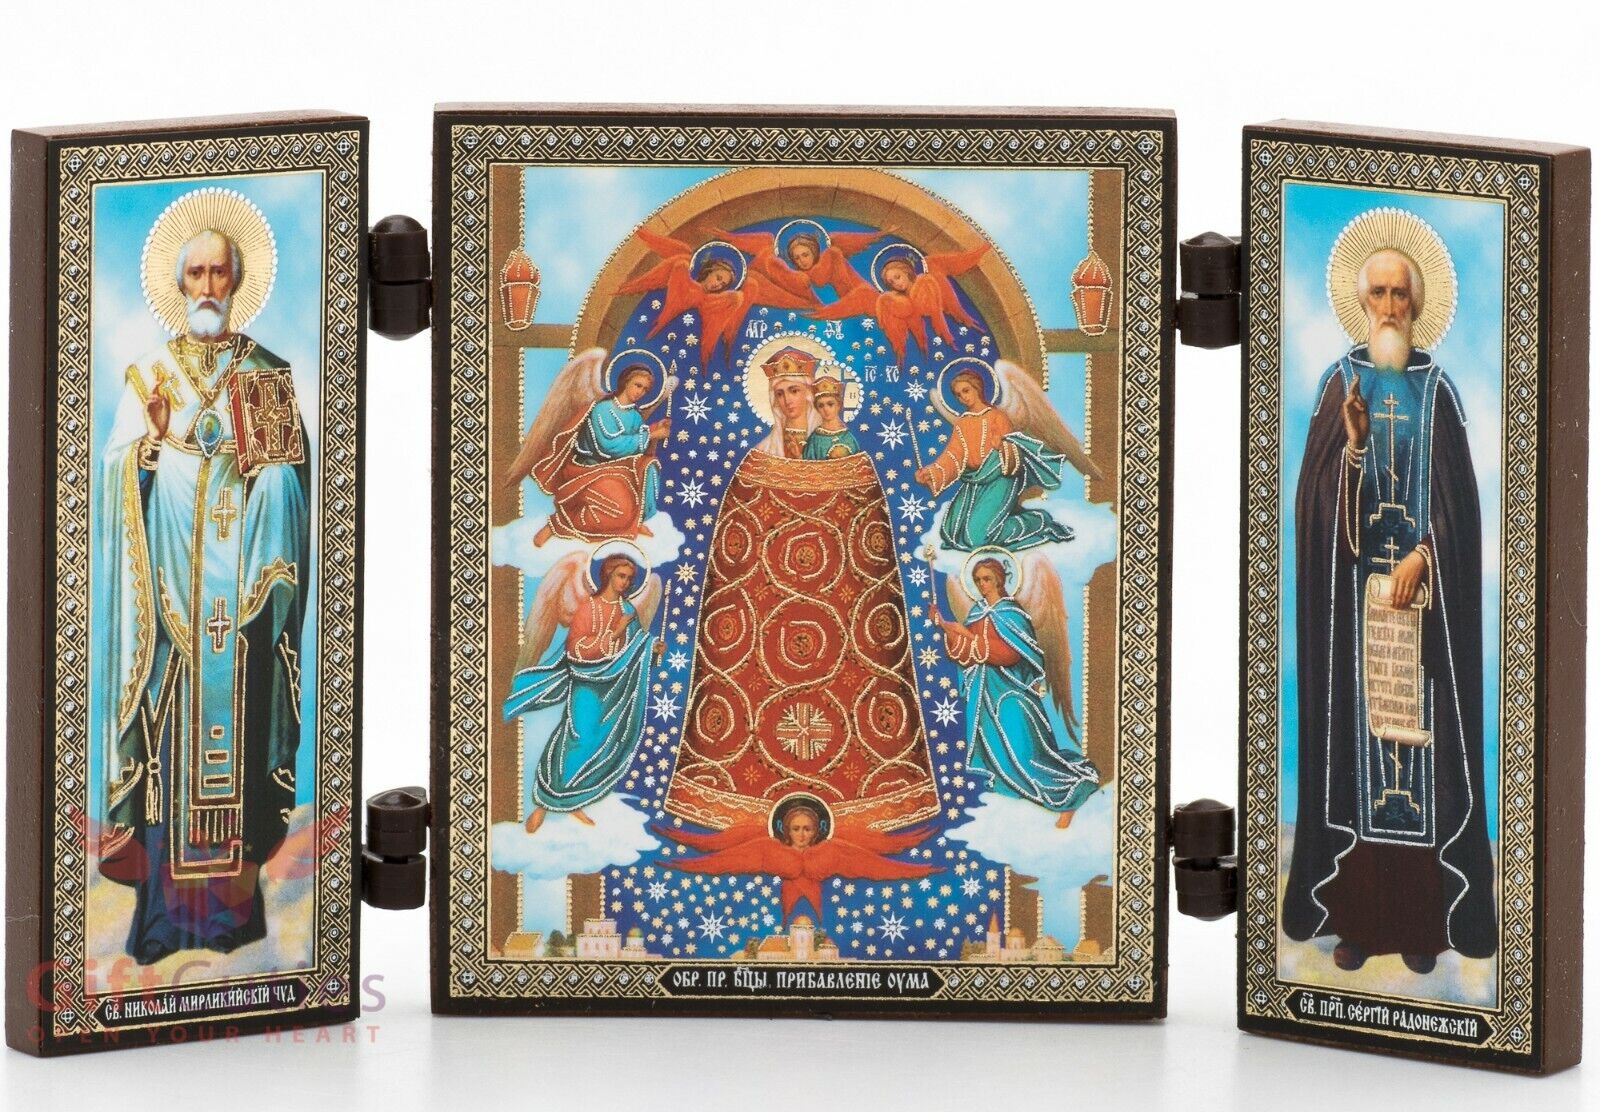 Folding Wooden Triptych Icon of Addition of the Mind Virgin Mary with Saints